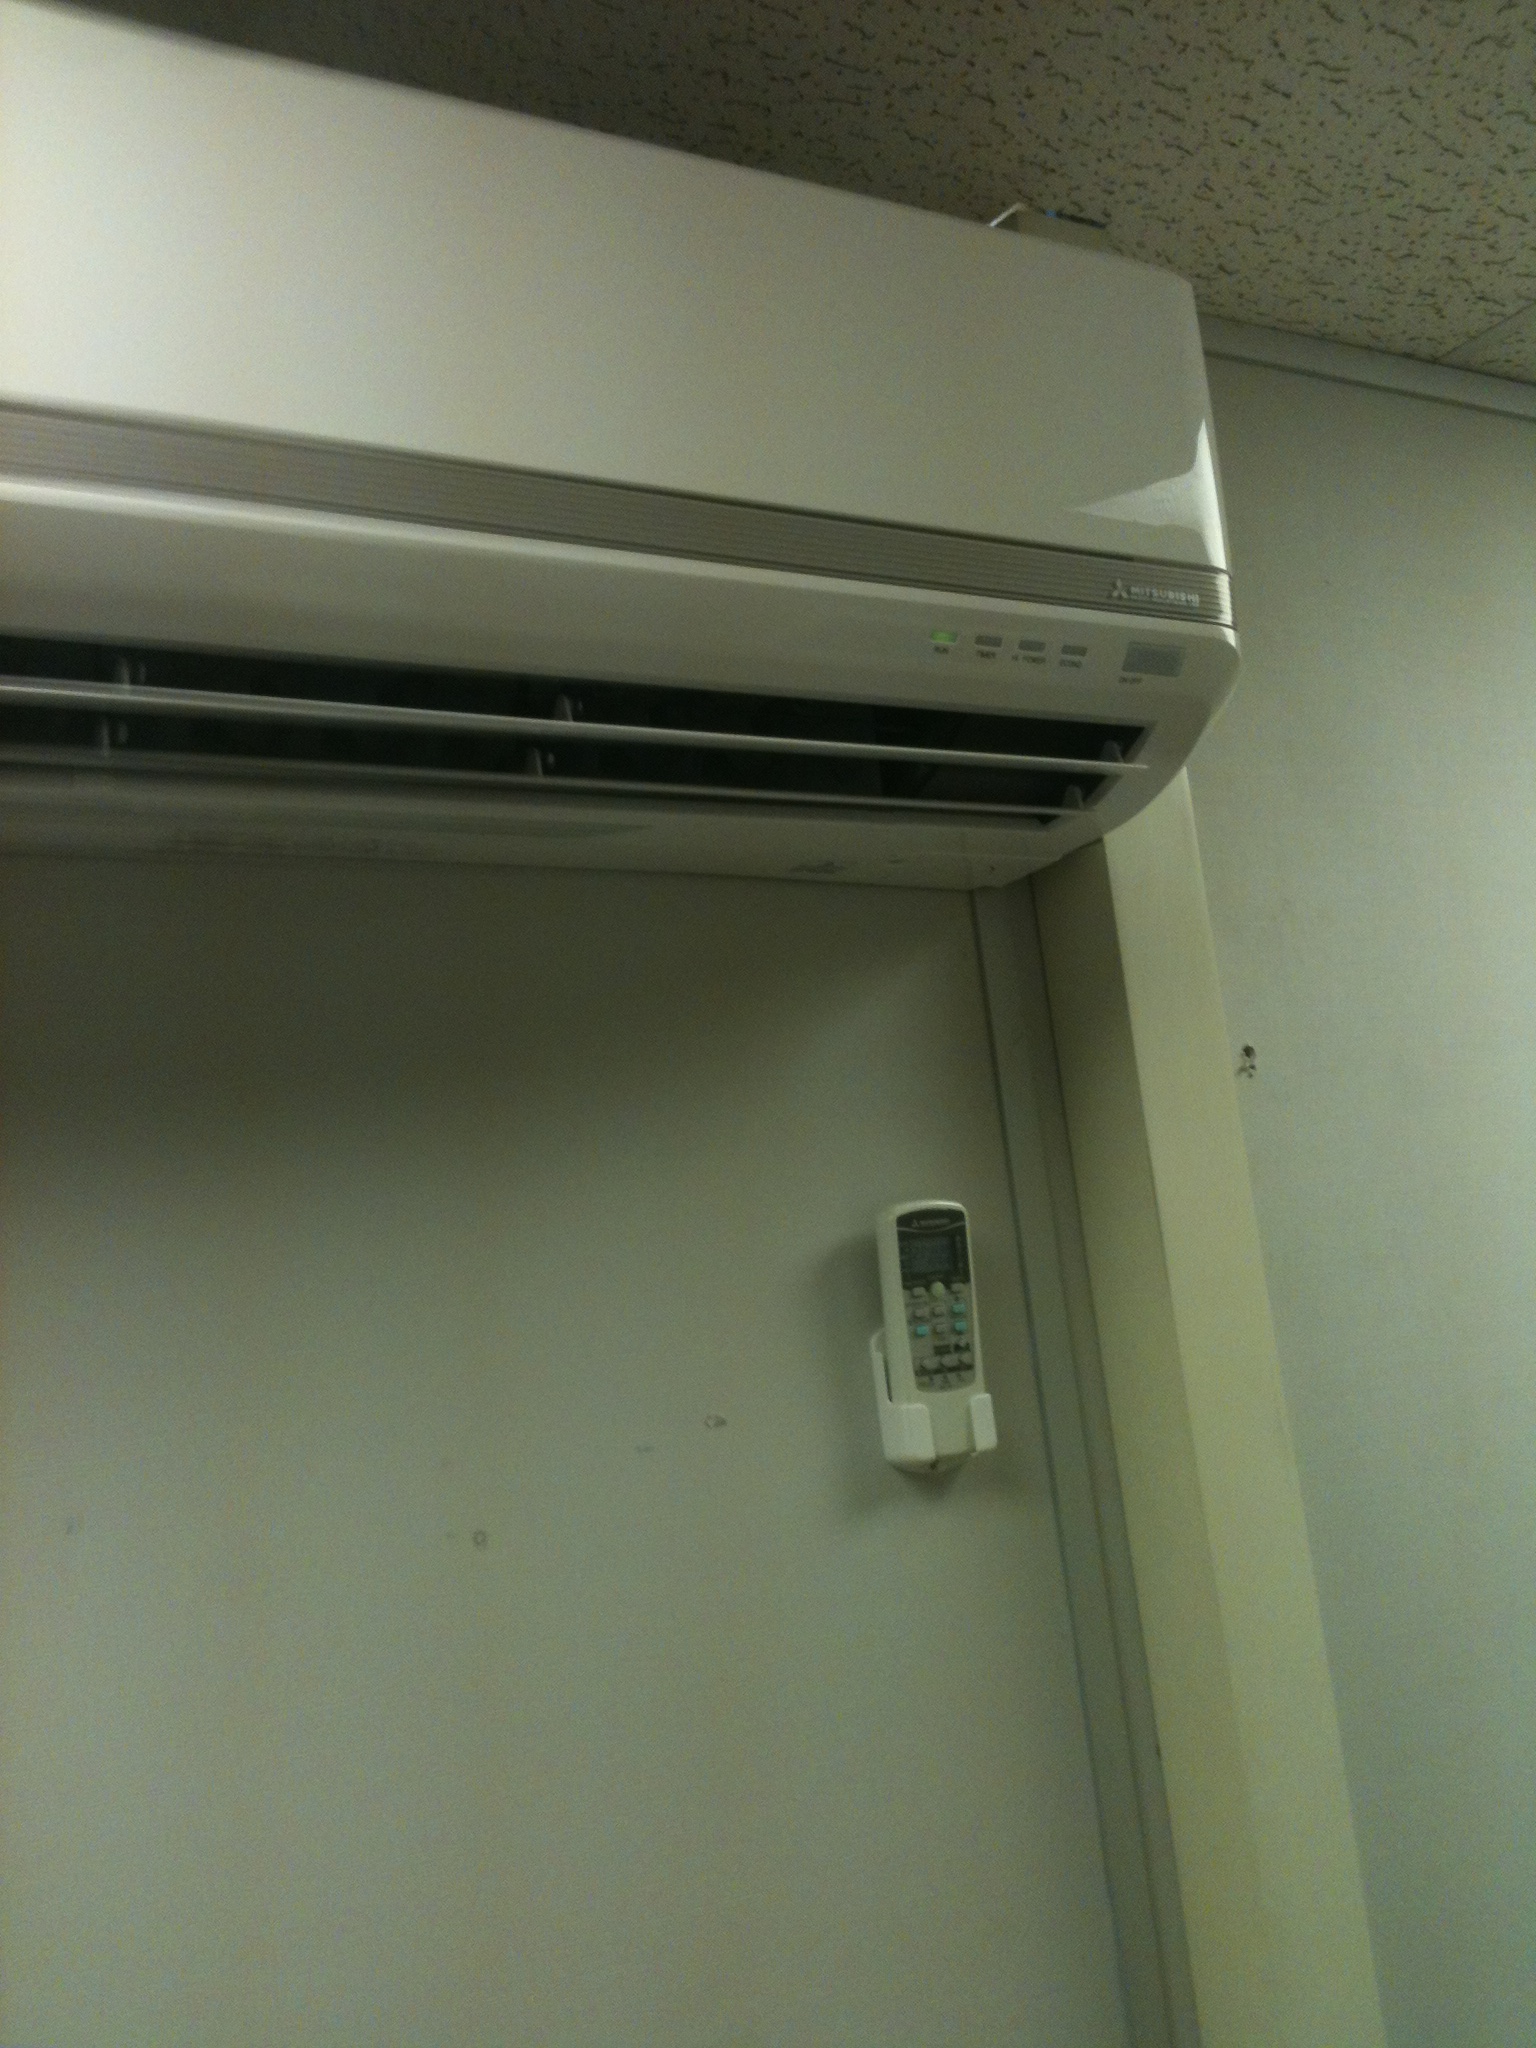 server room air conditioning unit with controller